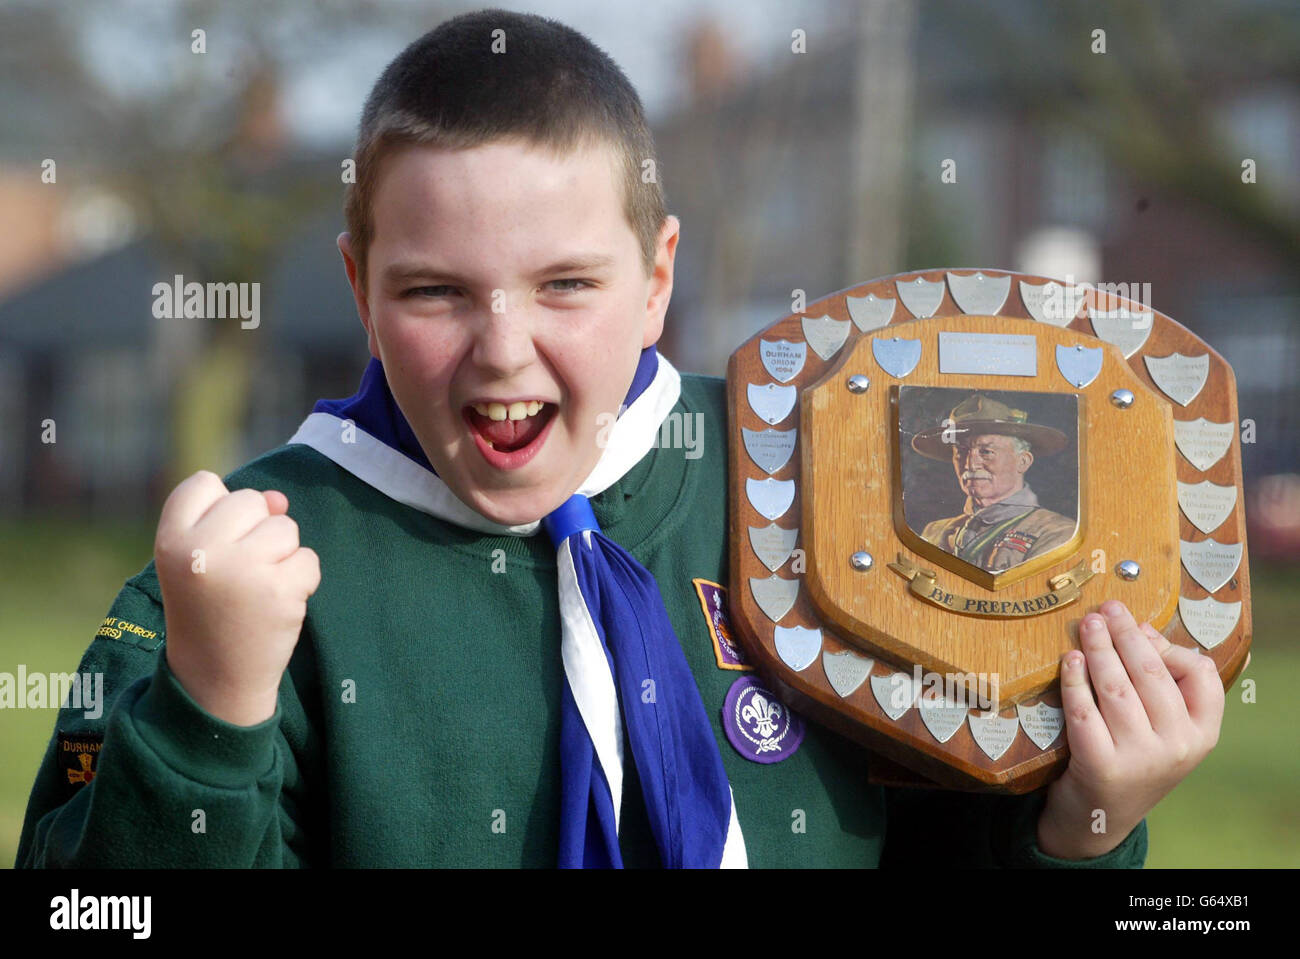 Joseph Smith holding up his winners shield. The 10-year-old Cub Scout of Pittington Primary School, Co Durham won a team swimming gala on his own after the rest of his troops failed to turn up. Joseph won all 12 races that he entered. Stock Photo